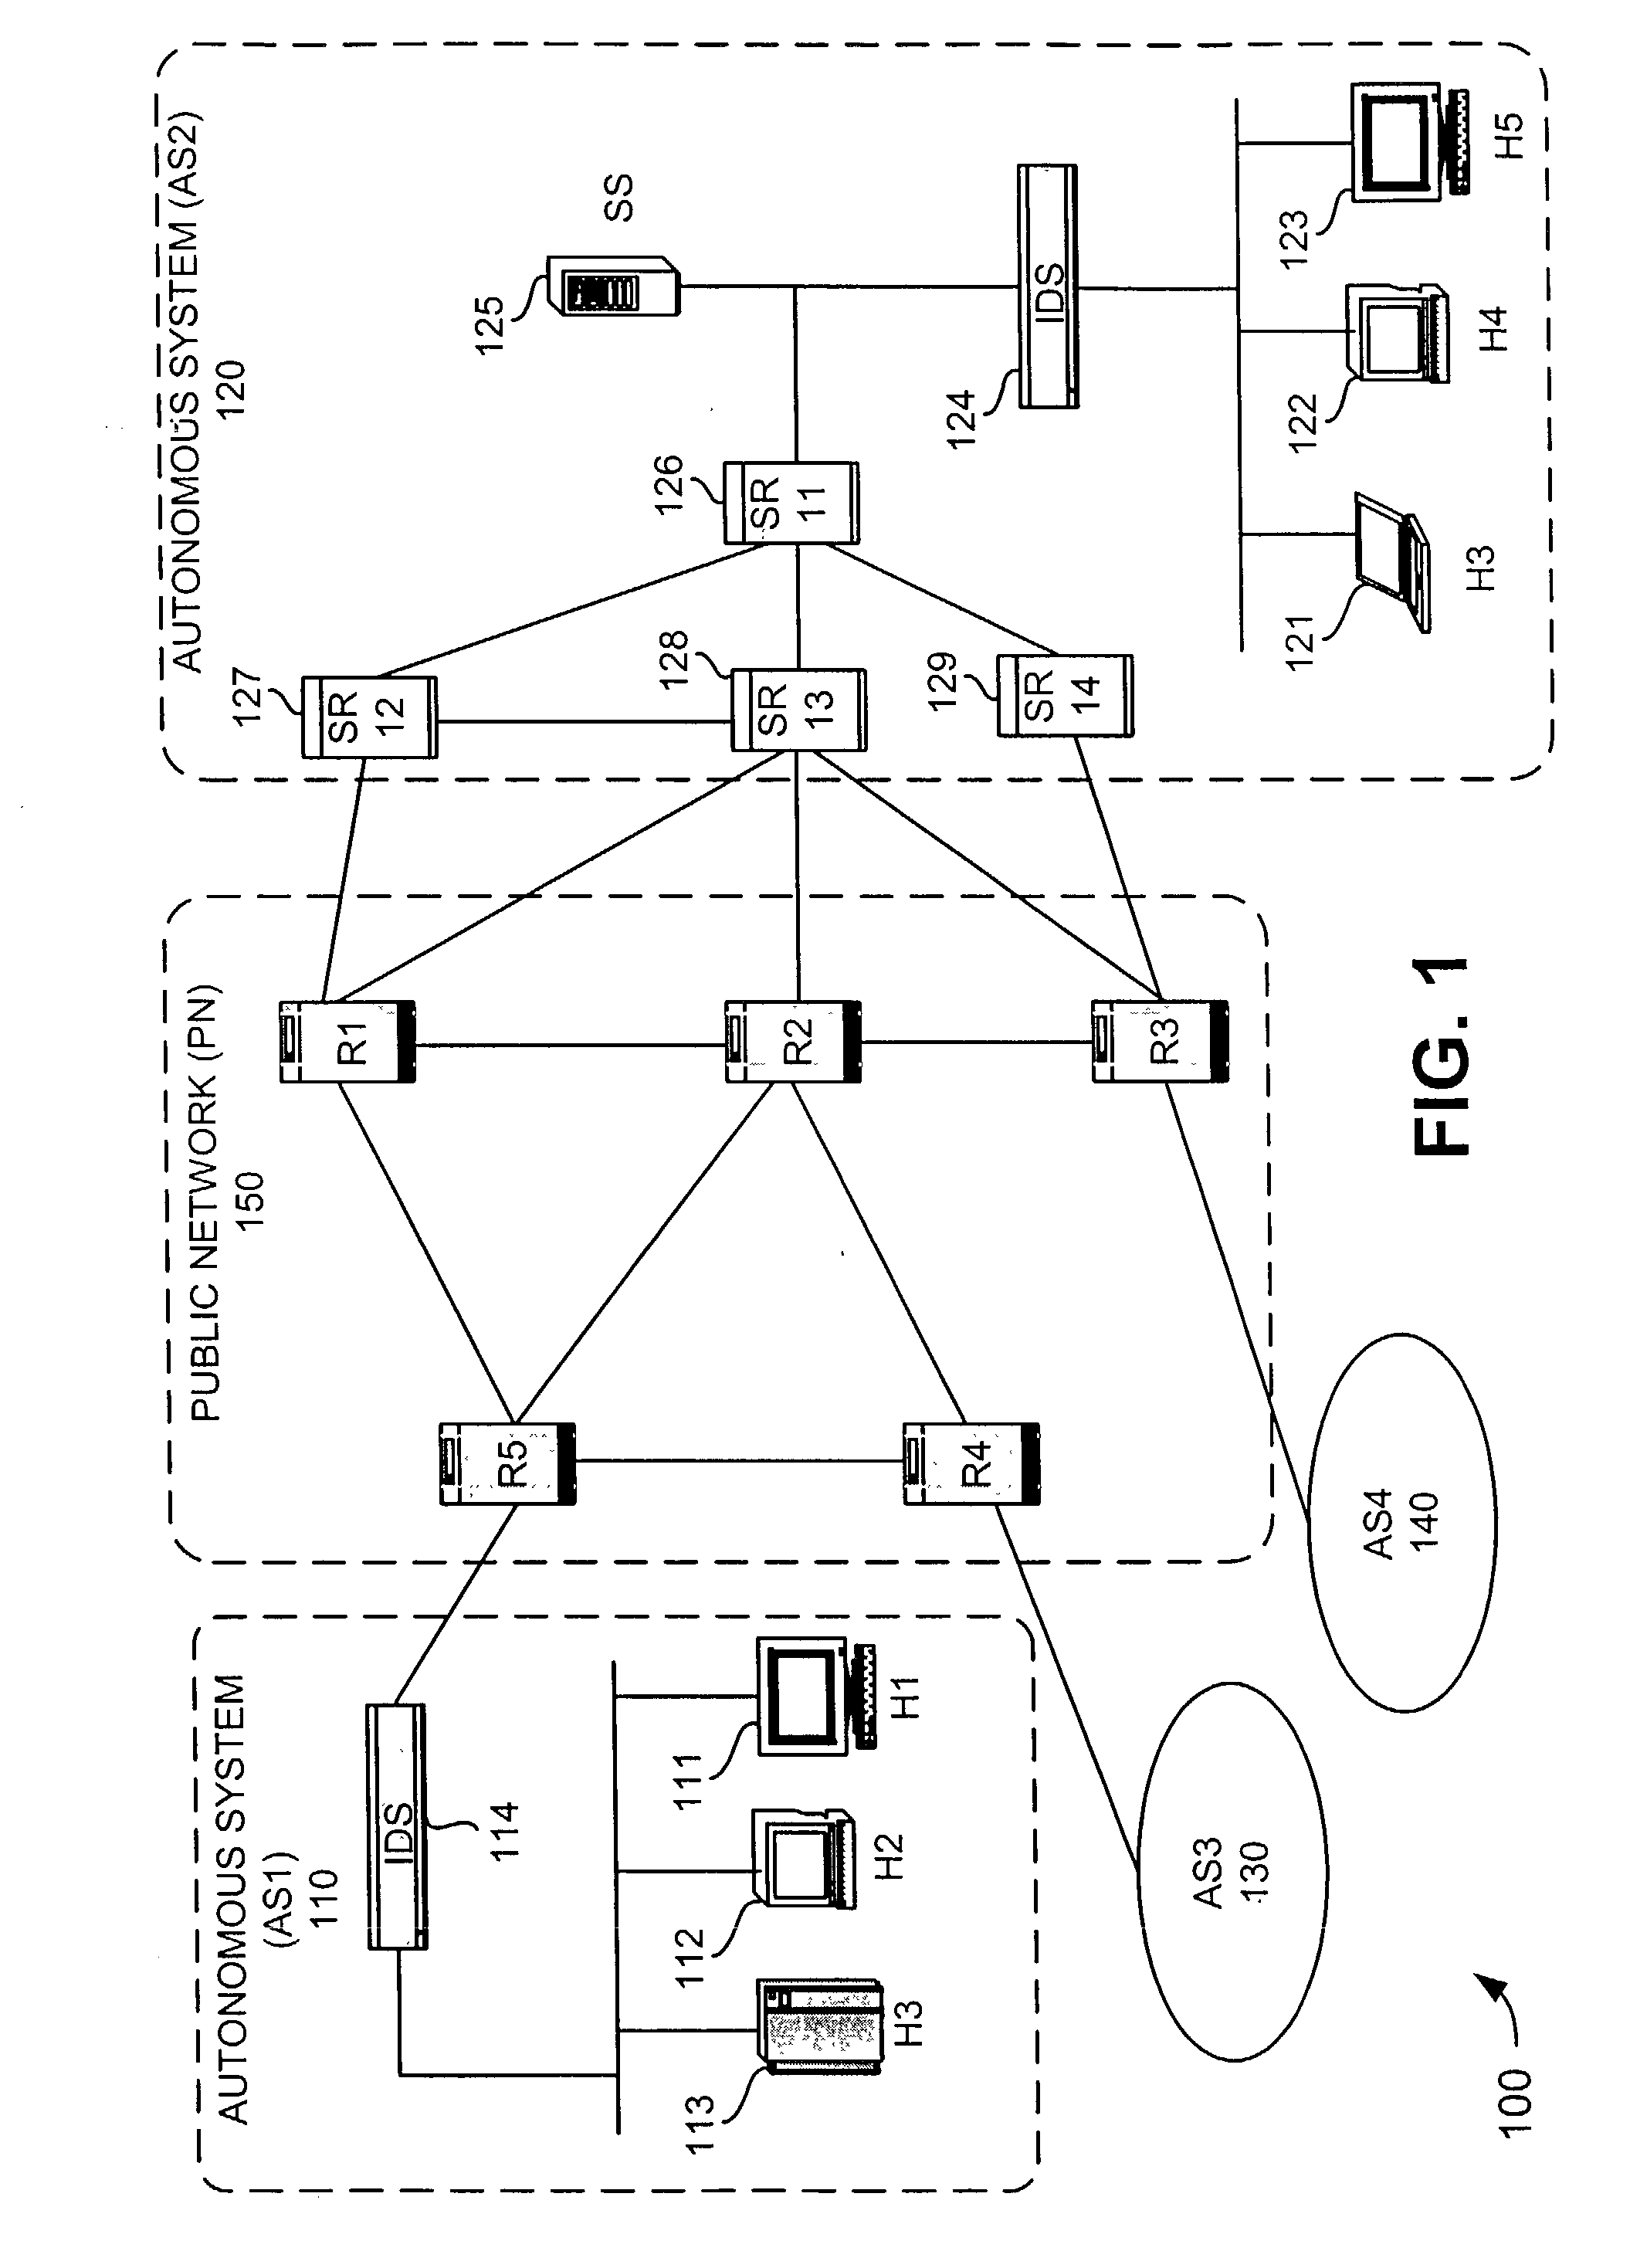 Hash-based systems and methods for detecting, preventing, and tracing network worms and viruses